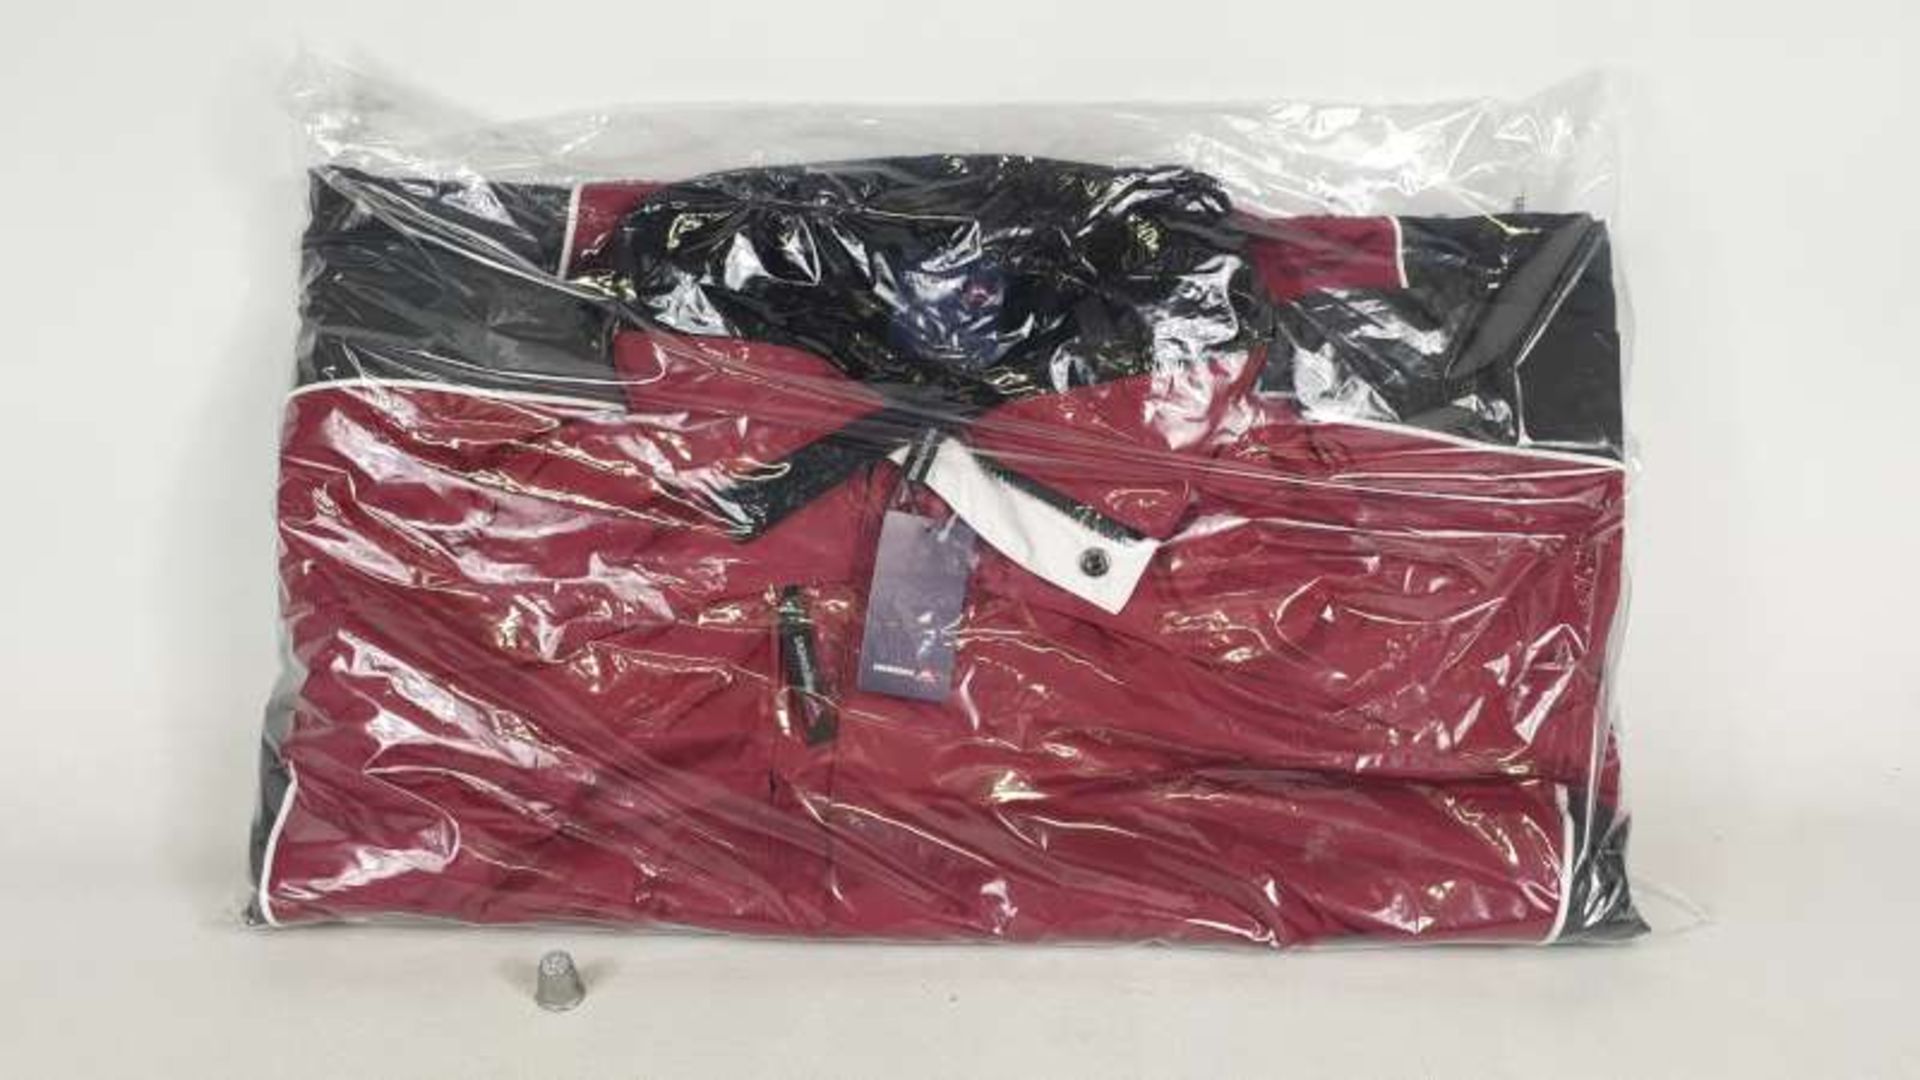 20 X BRAND NEW SNOWDONIA 3 IN 1 JACKETS SIZE MEDIUM IN 4 BOXES